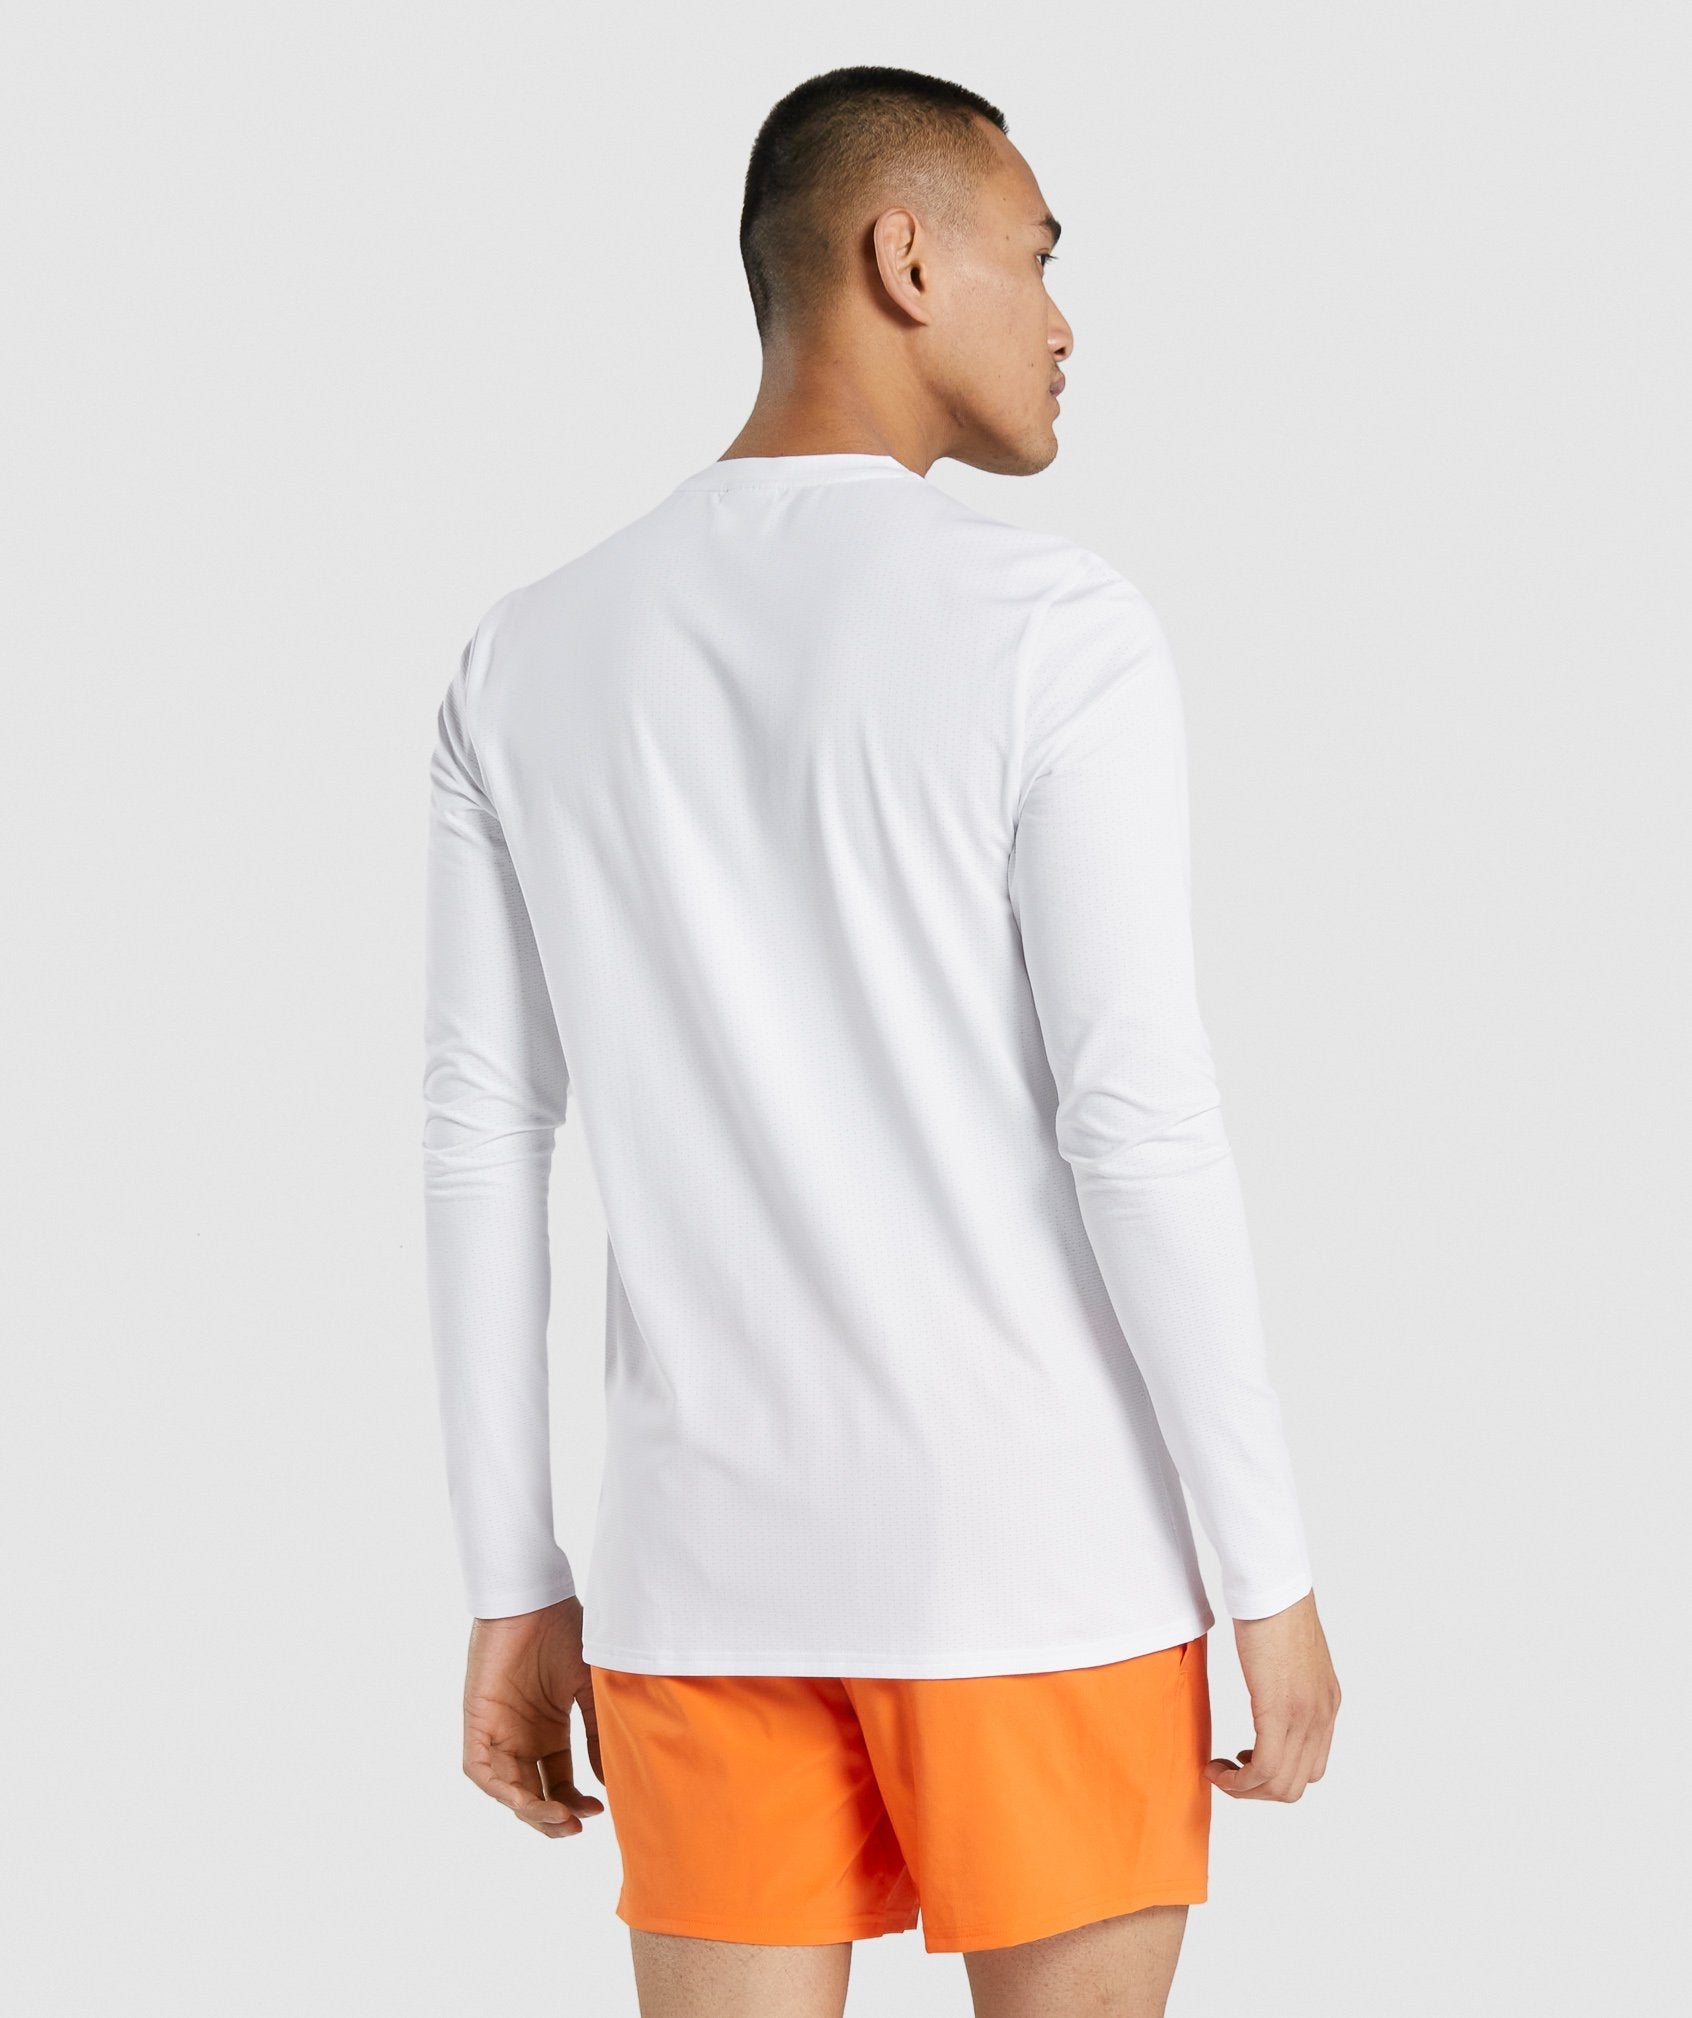 Arrival Graphic Long Sleeve T-Shirt in White - view 2